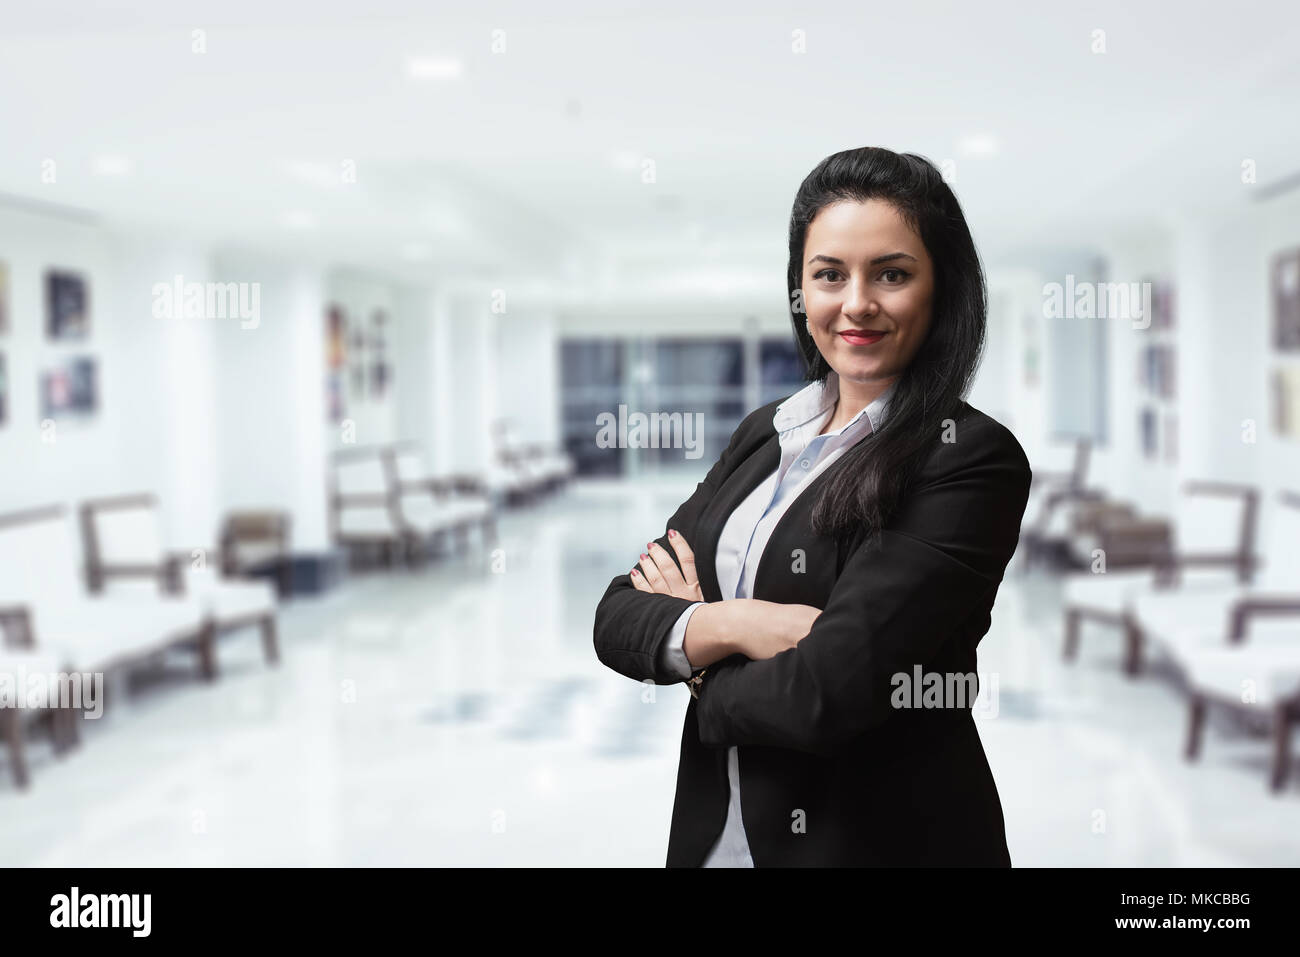 Smiling bank manager welcoming warm personality bright big smile in large building Stock Photo